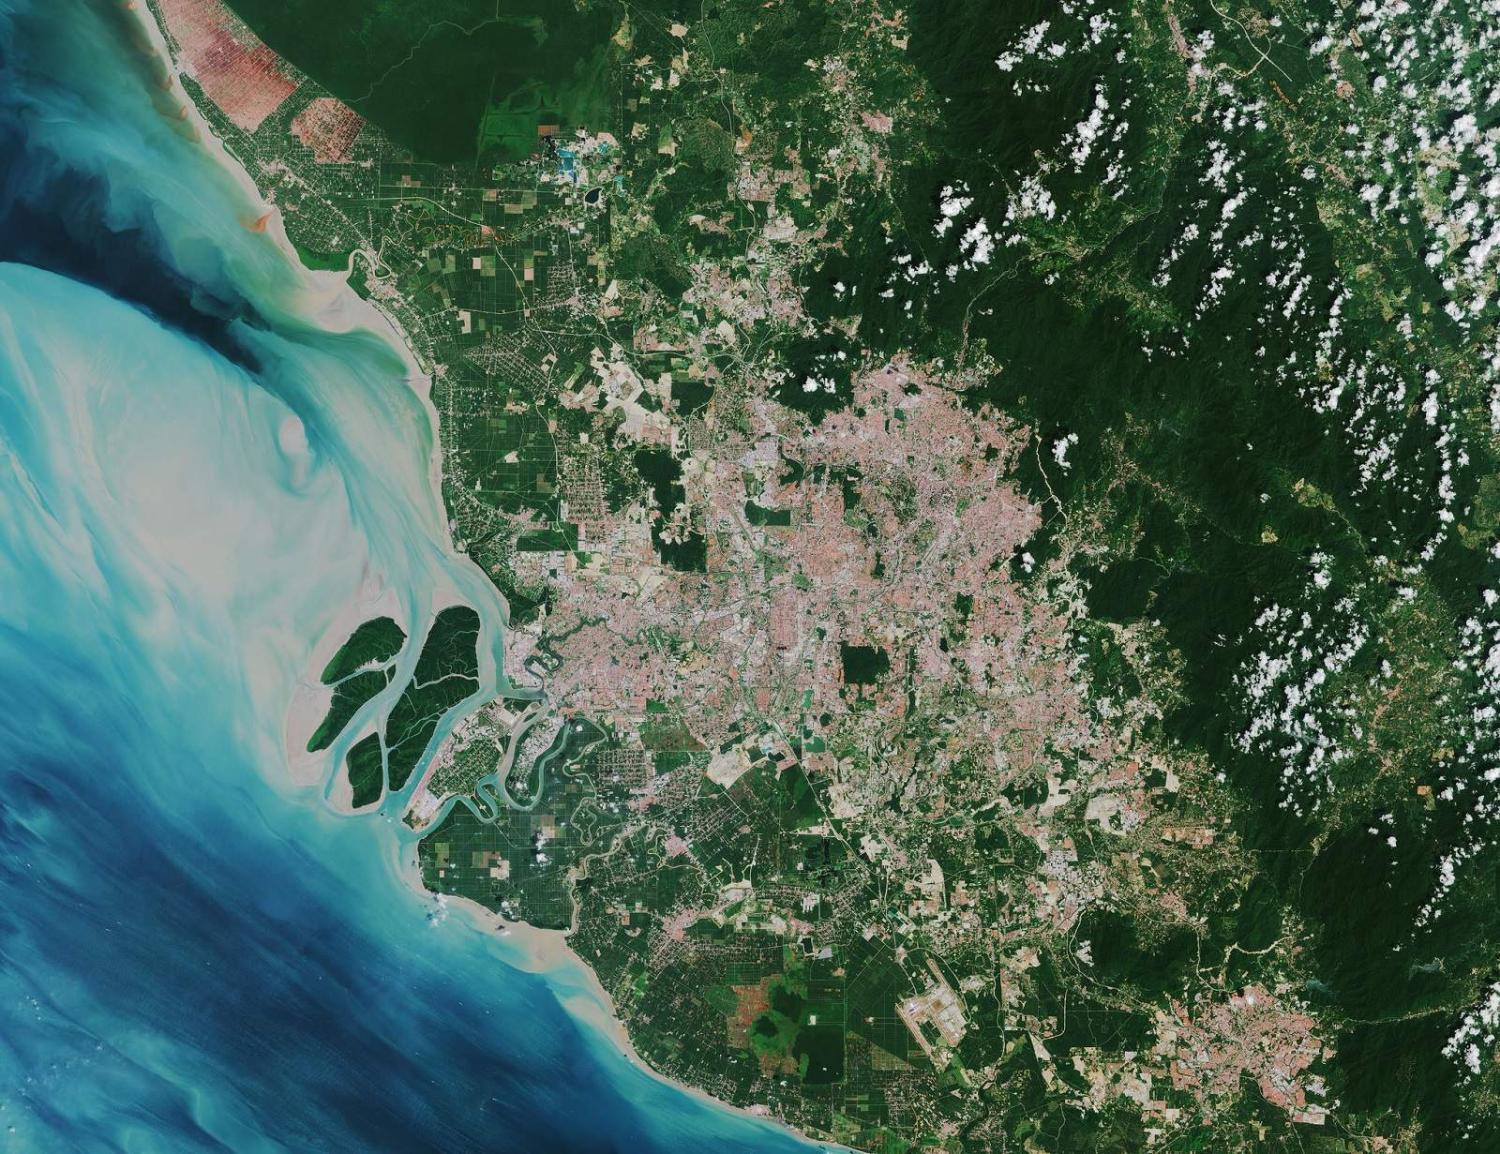 The Malacca Strait off the coast of Malaysia (European Space Agency/Flickr)